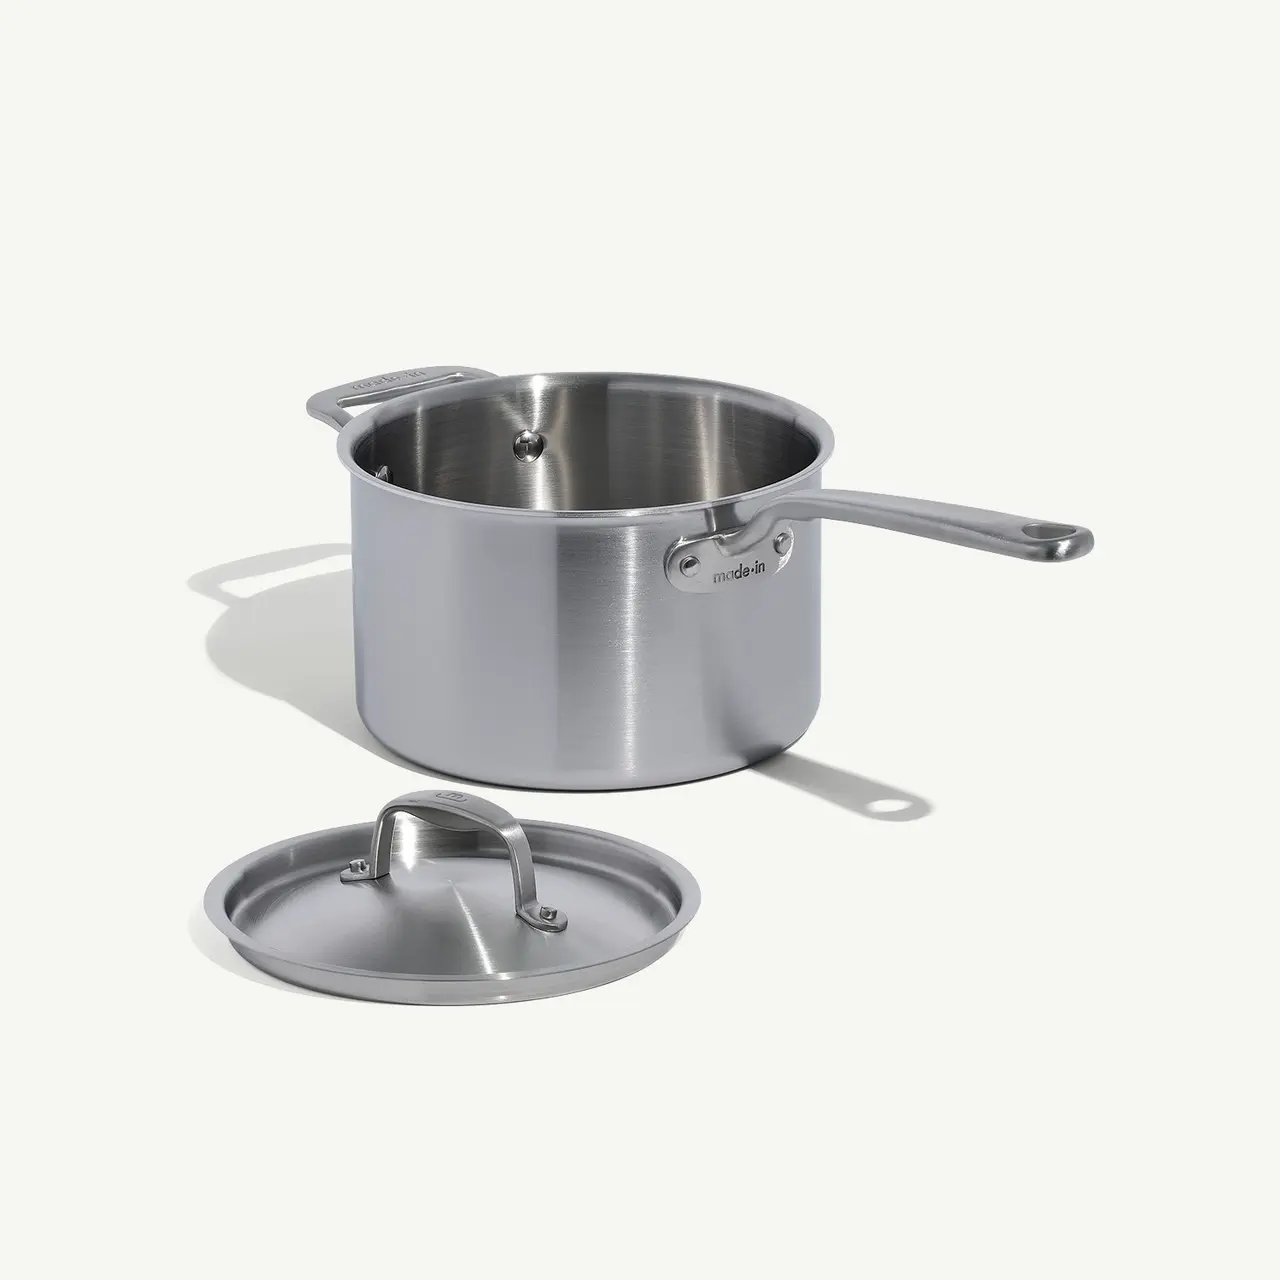 A stainless steel saucepan with a lid set to the side casts a soft shadow on a plain surface.